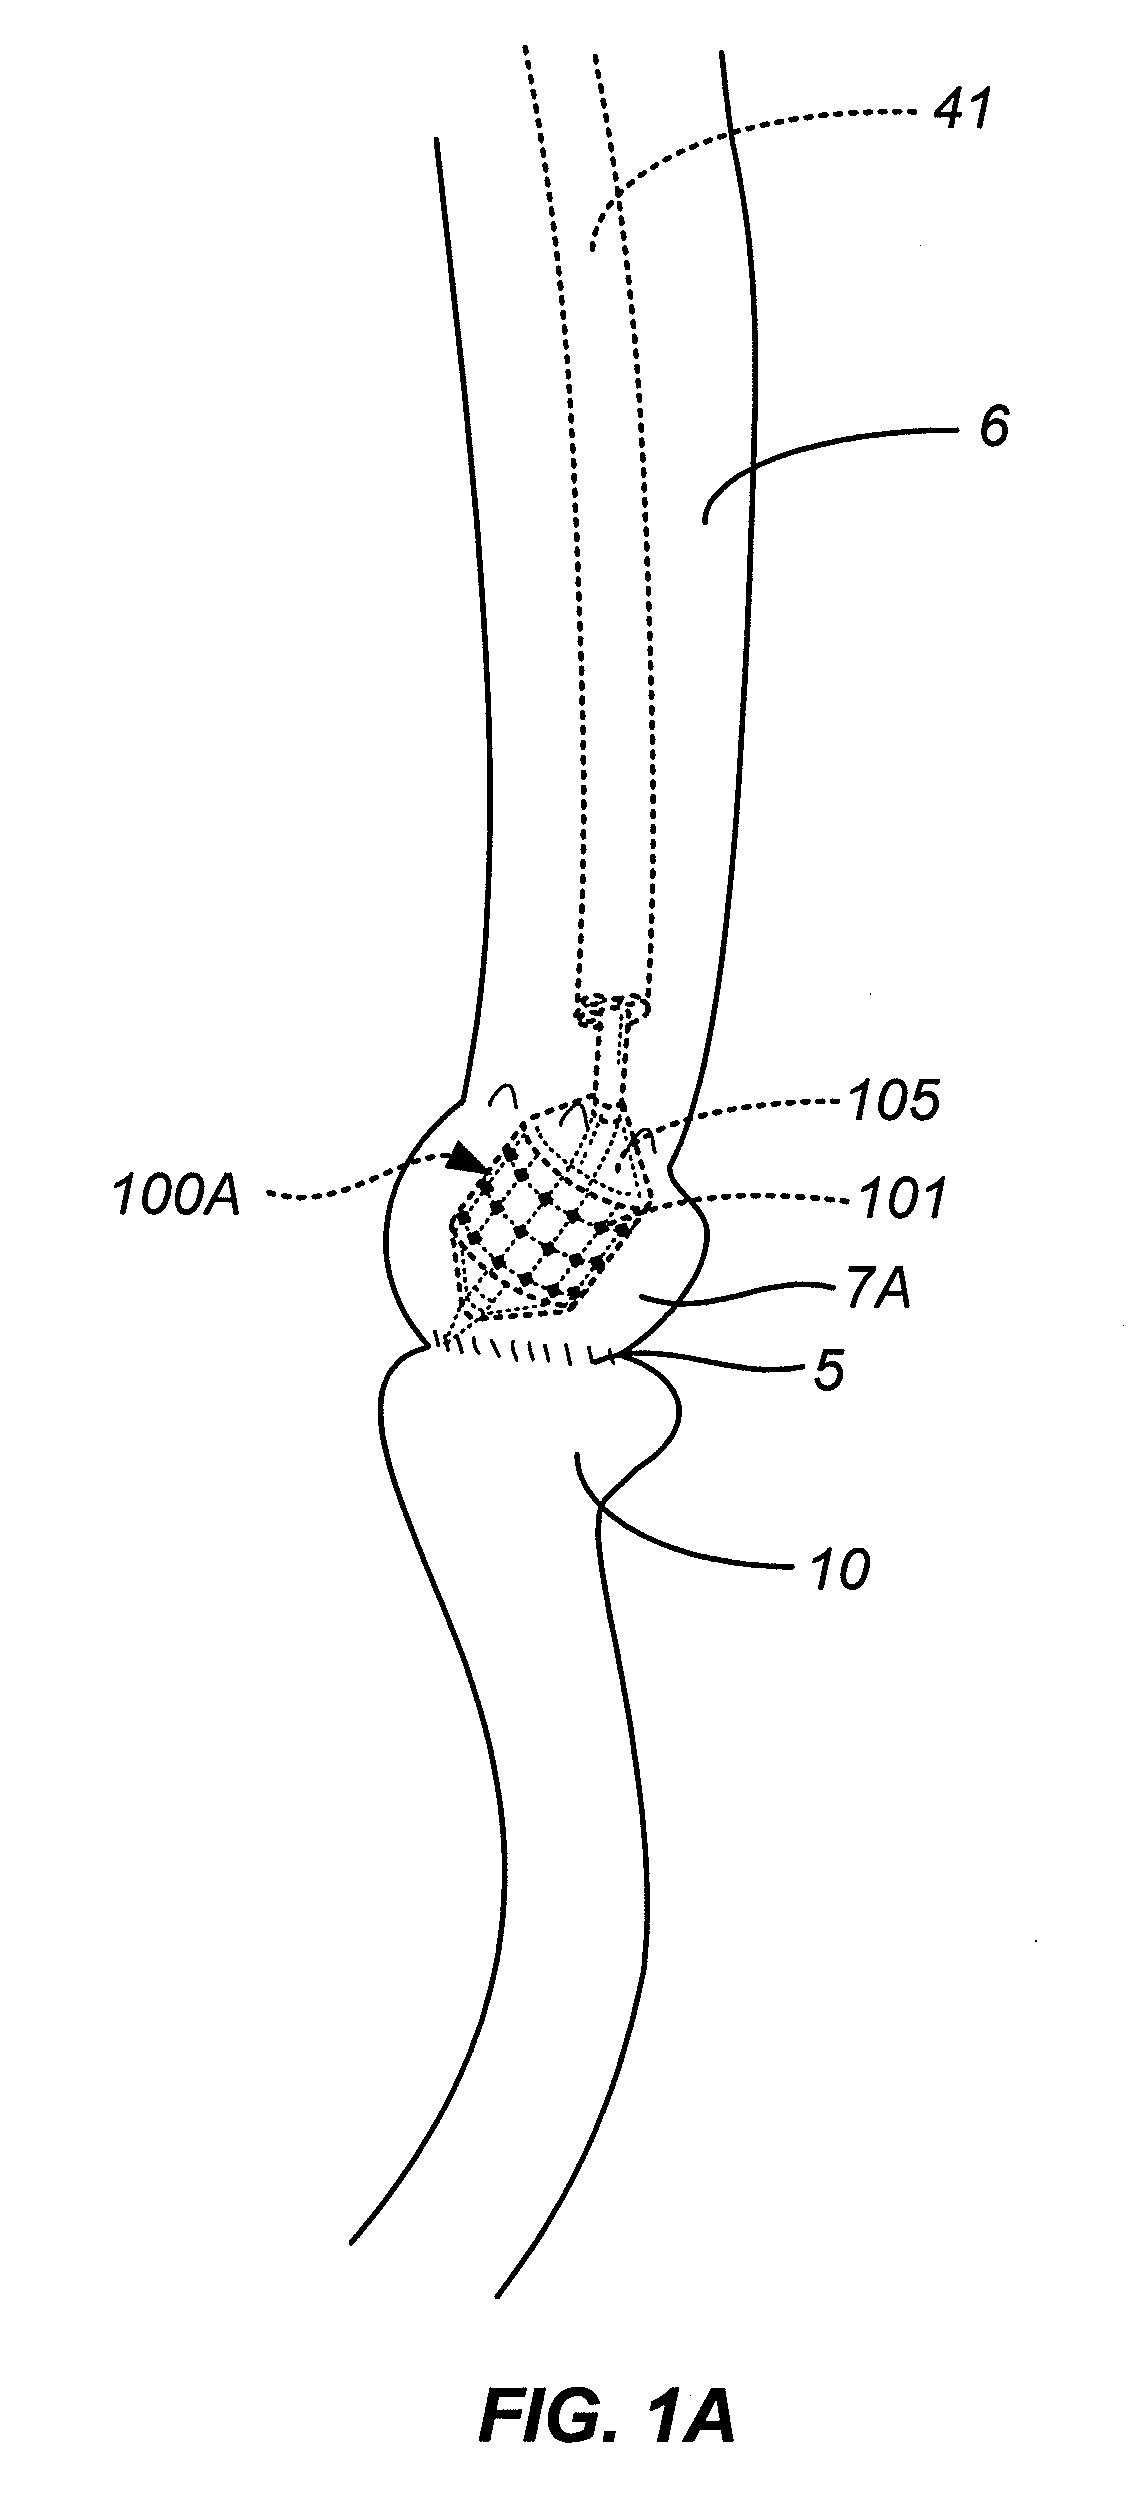 Method and Apparatus for Gastrointestinal Tract Ablation to Achieve Loss of Persistent and/or Recurrent Excess Body Weight Following a Weight-Loss Operation